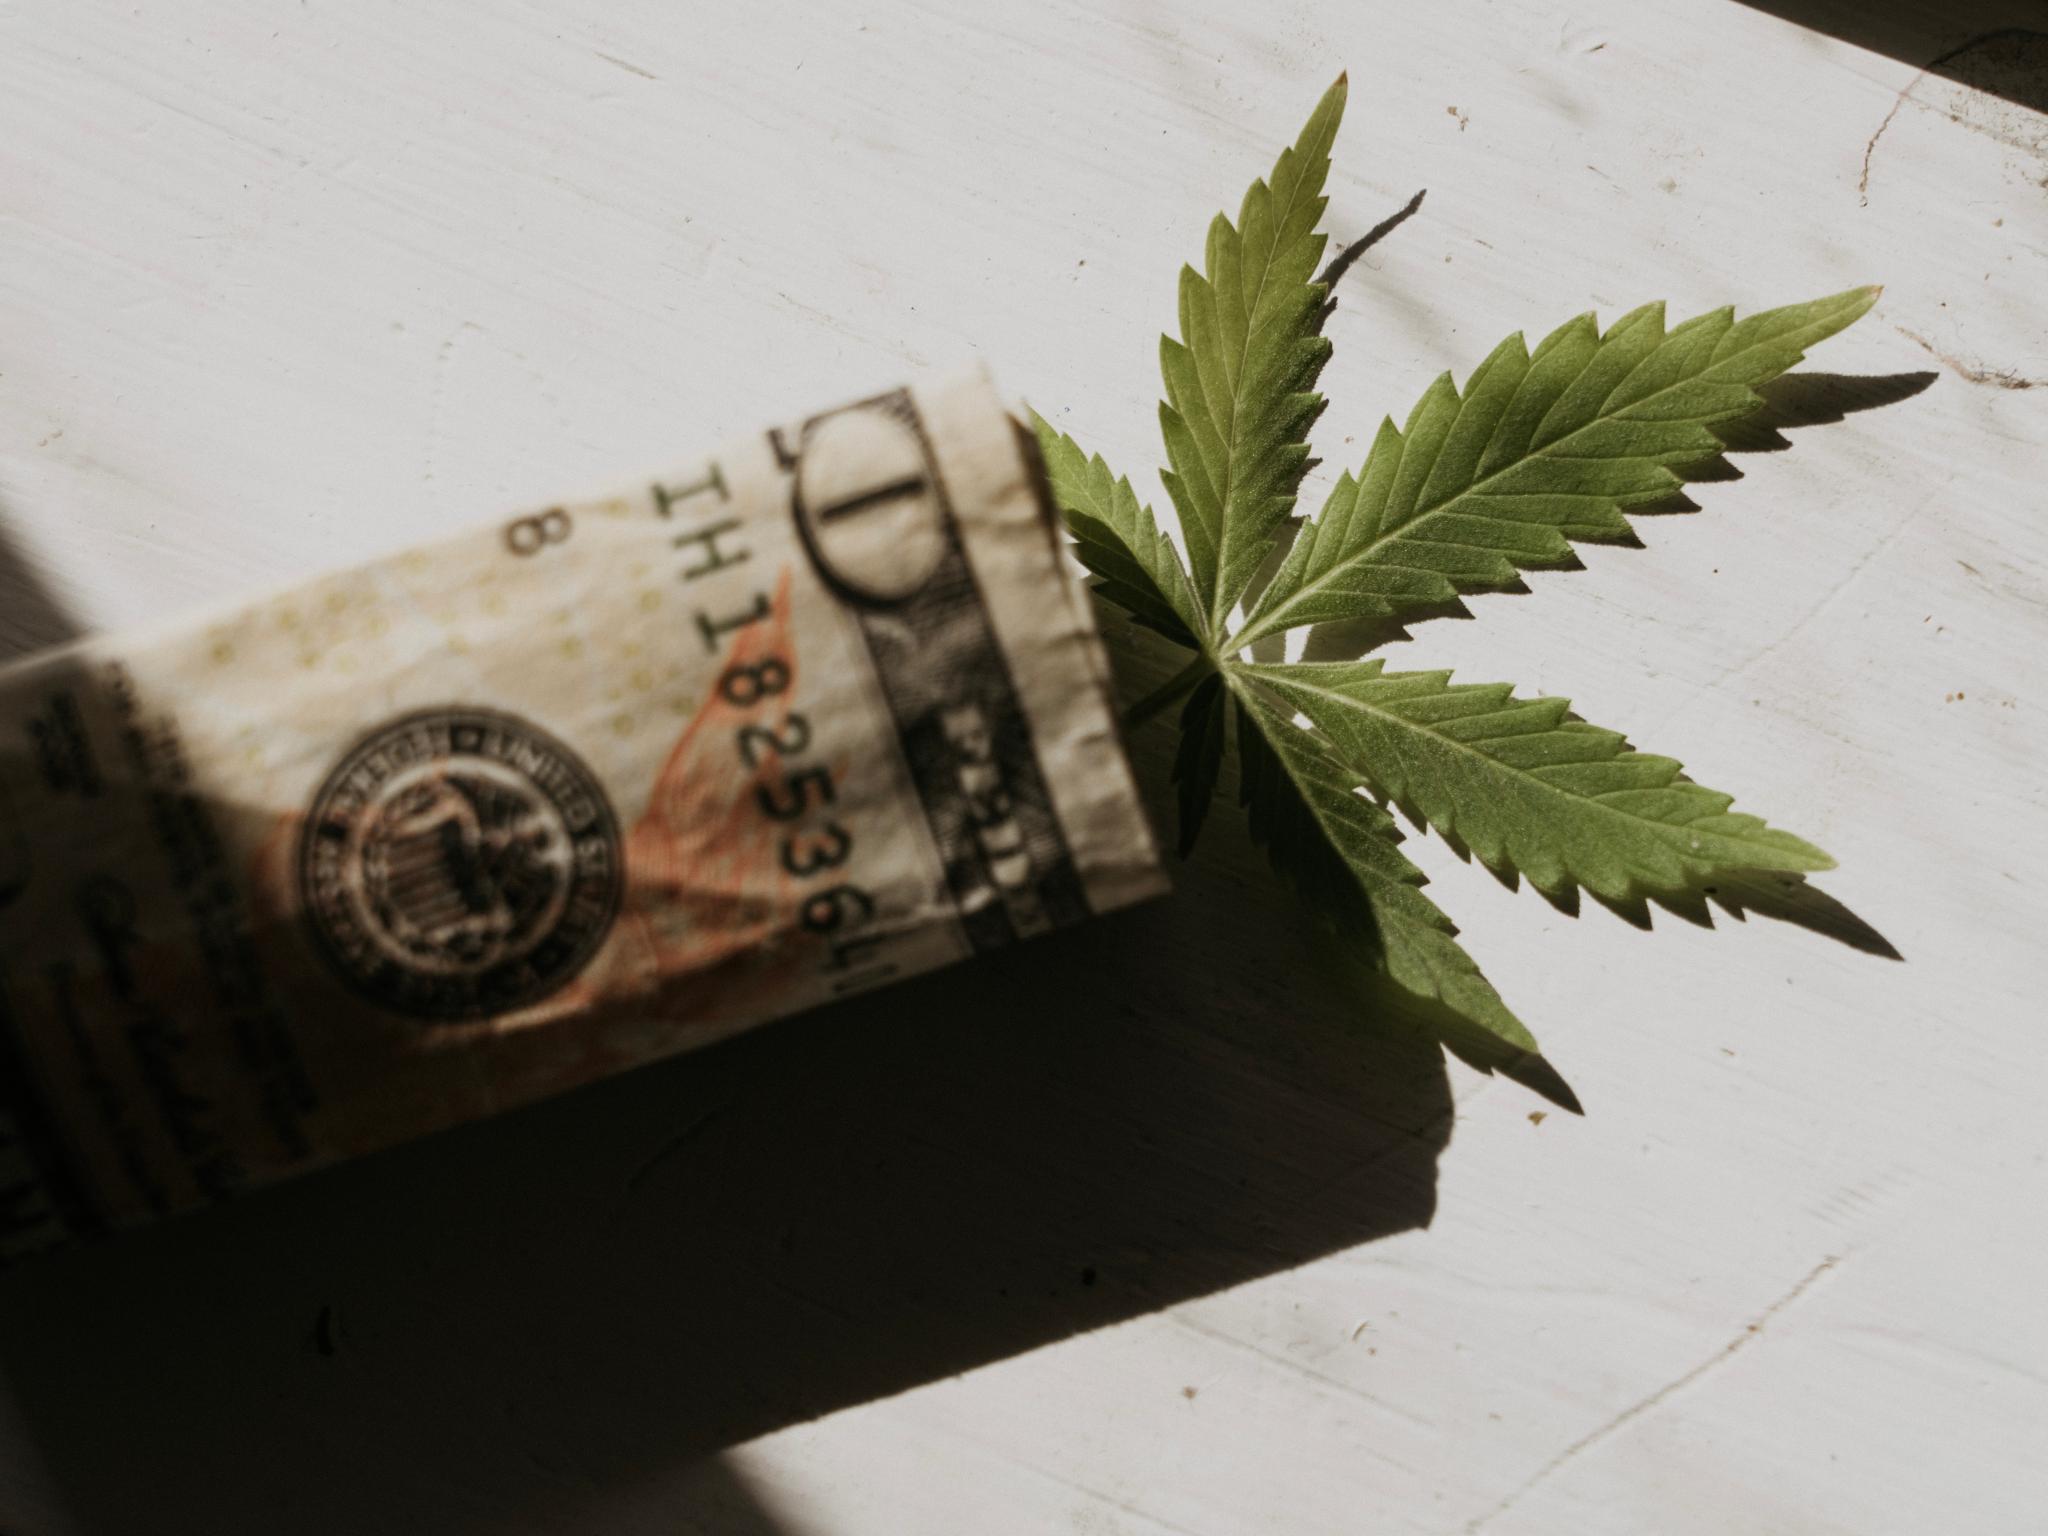  consolidation-and-cost-reduction-measures-behind-112-yoy-q3-revenue-growth-for-cannabis-co-bzam 